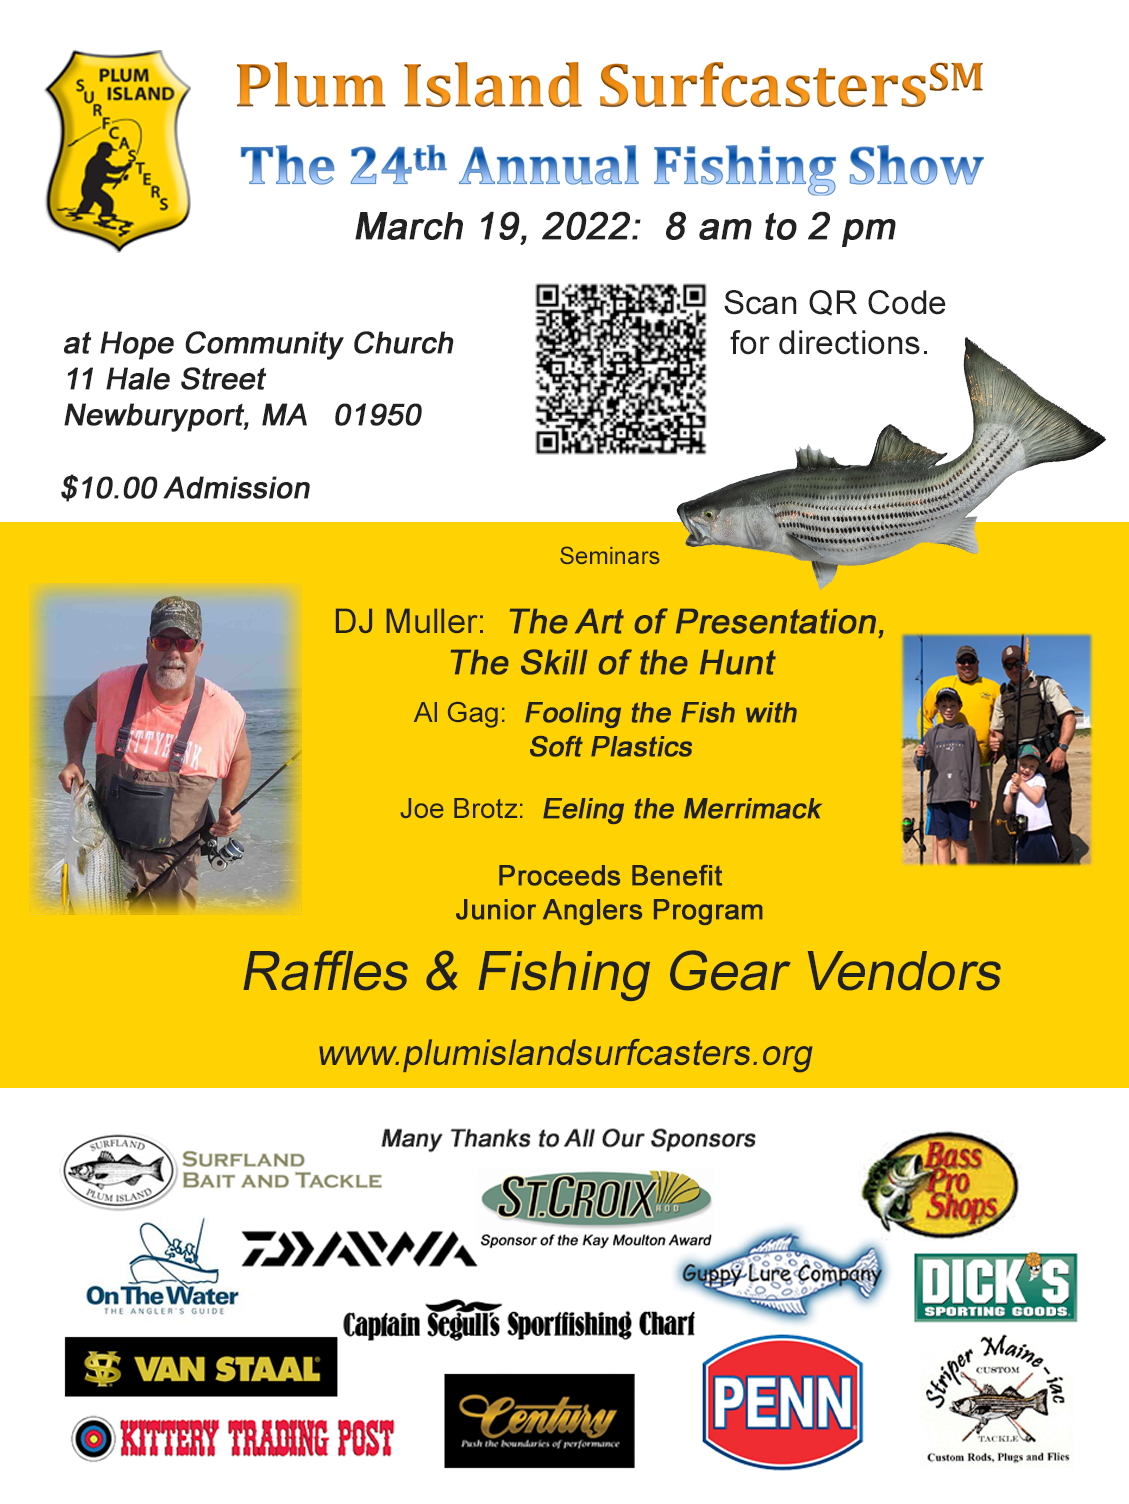 PISC Fishing Show on March 19, 2022